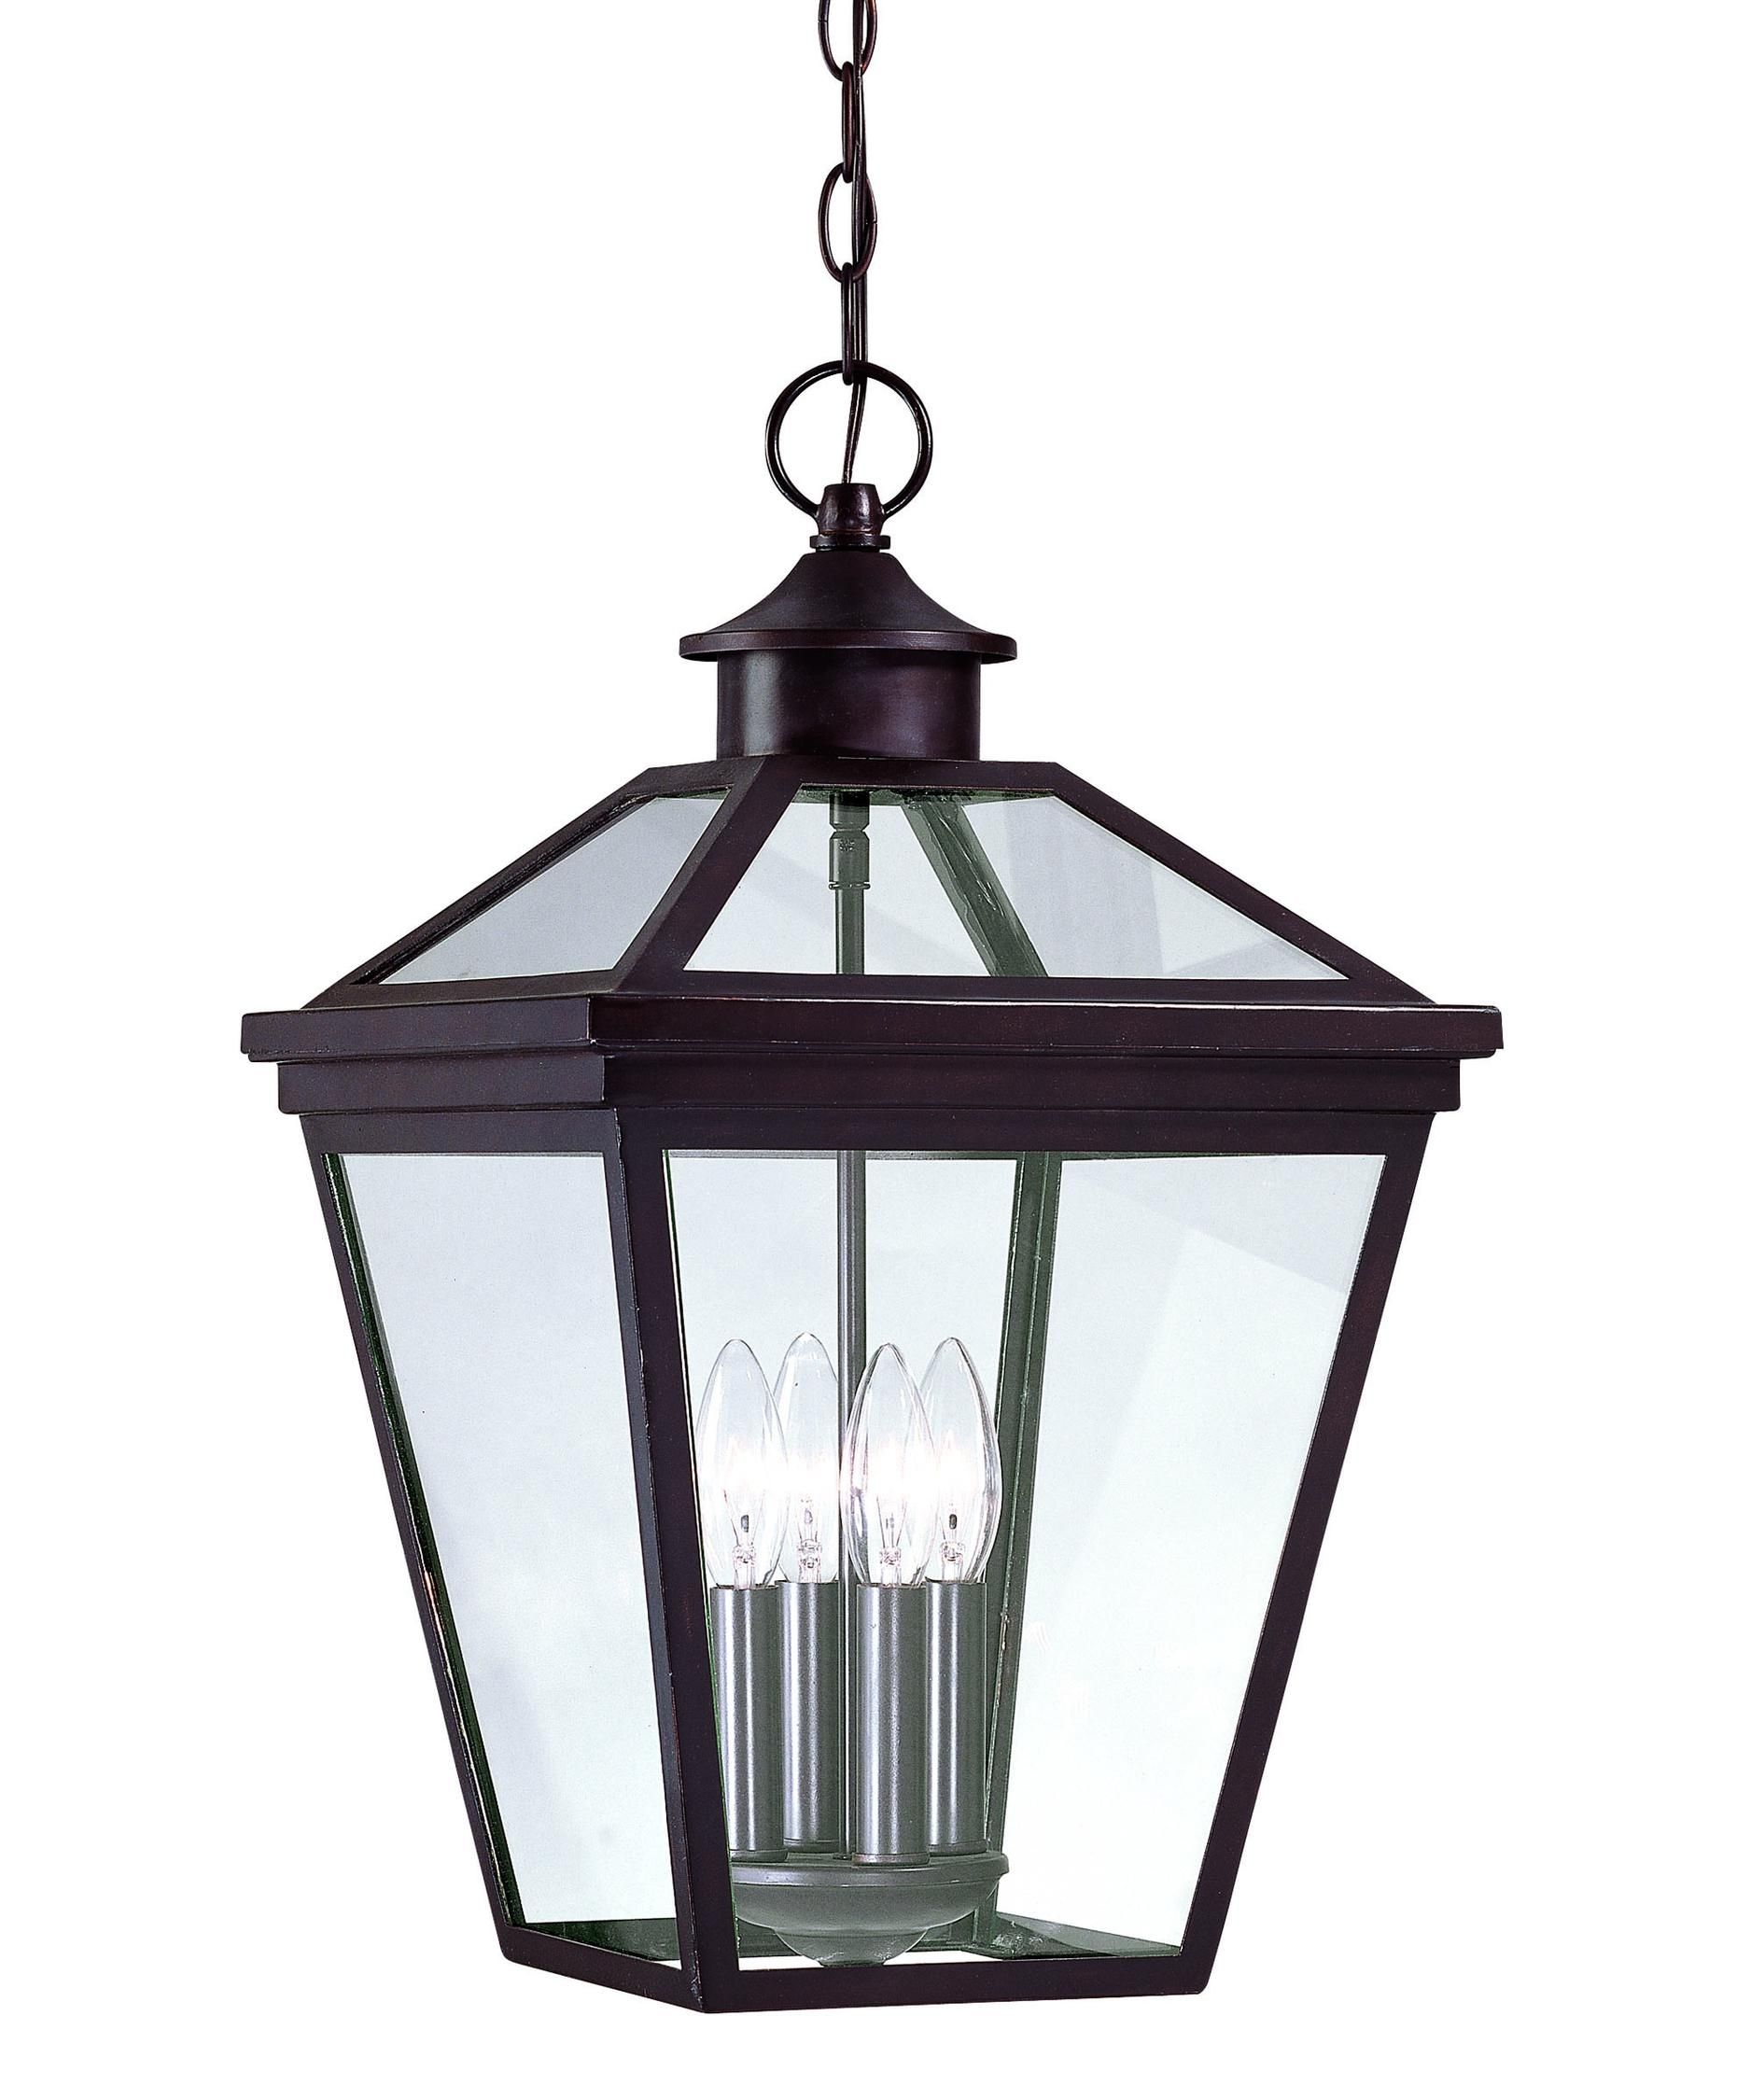 Furniture : Outdoor Pendant Lights Outdoor Pendant Lights Canada Pertaining To Outdoor Hanging Lanterns From Canada (View 12 of 15)